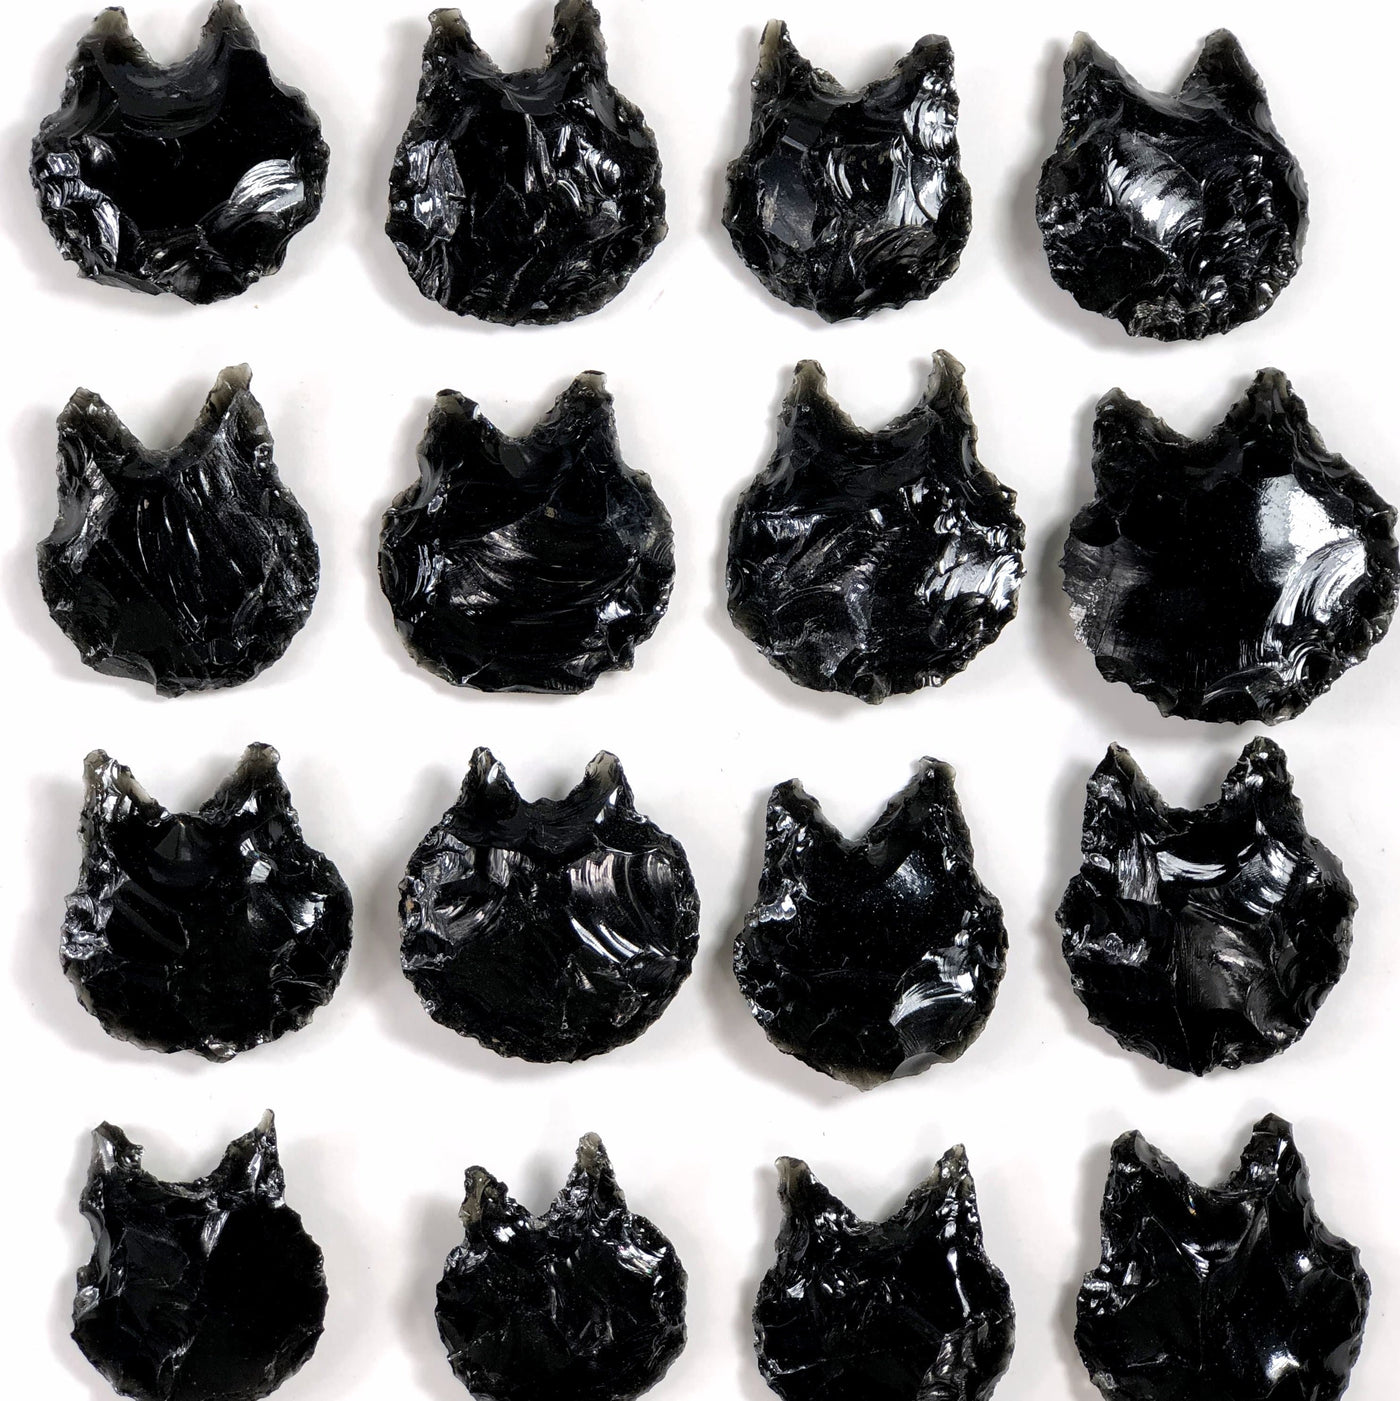 16 obsidian cats laid out on a white background